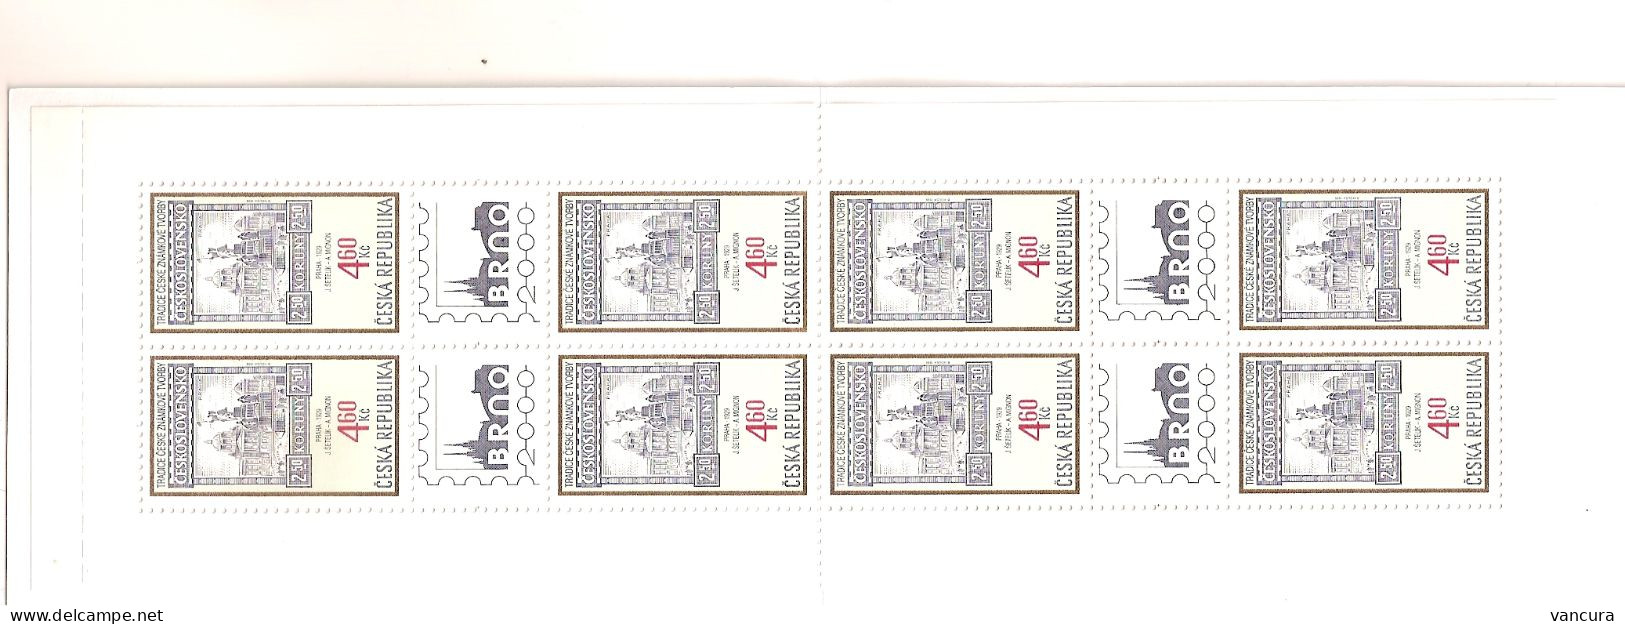 Booklet 204 Czech Republic Czech Stamp Design 1999 National Museum In Prague And The Statue Of St Wenceslas - Unused Stamps